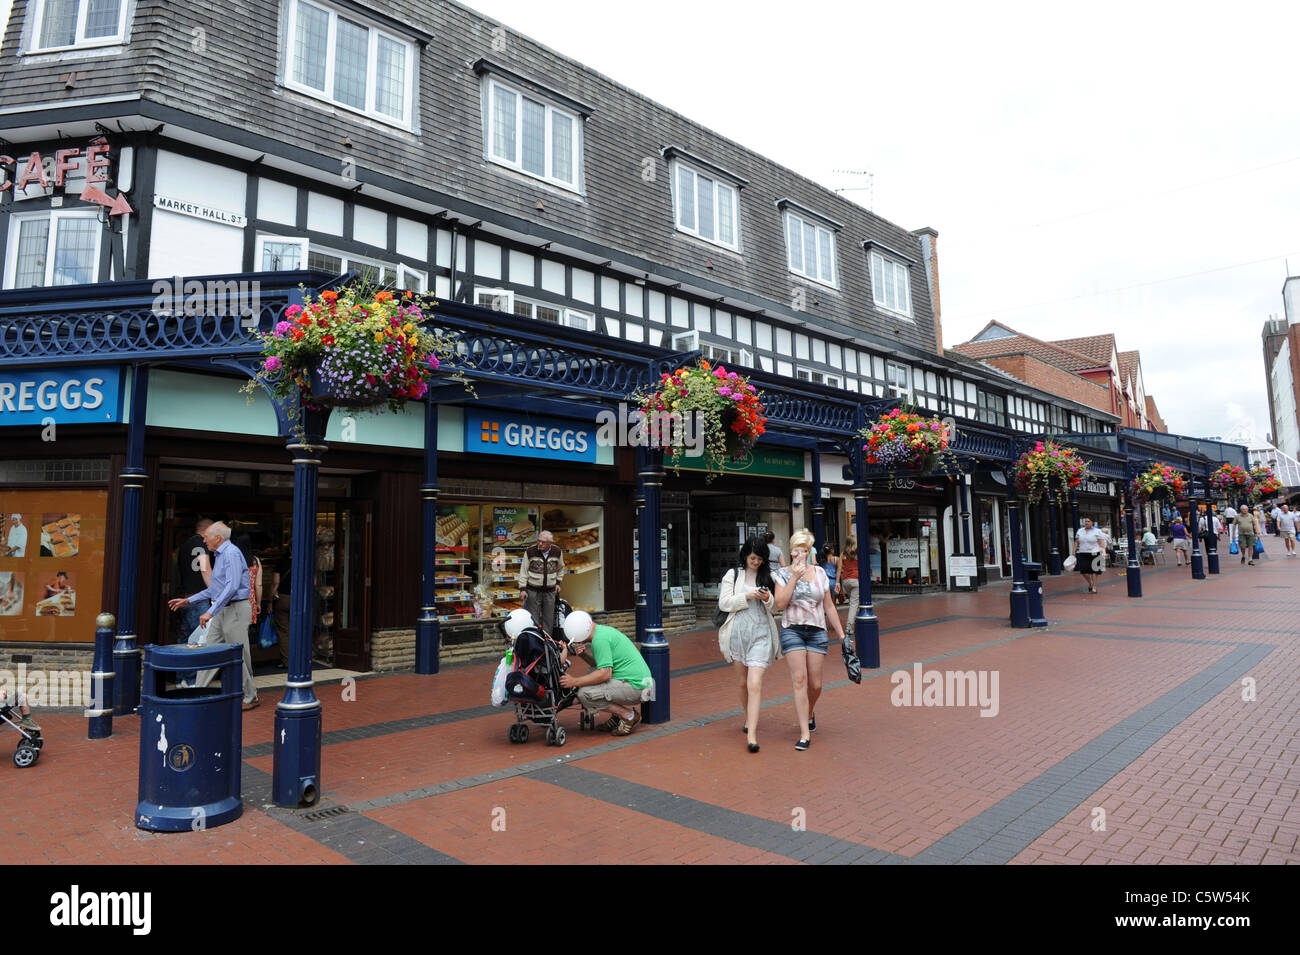 Cannock town centre Staffordshire Uk Stock Photo